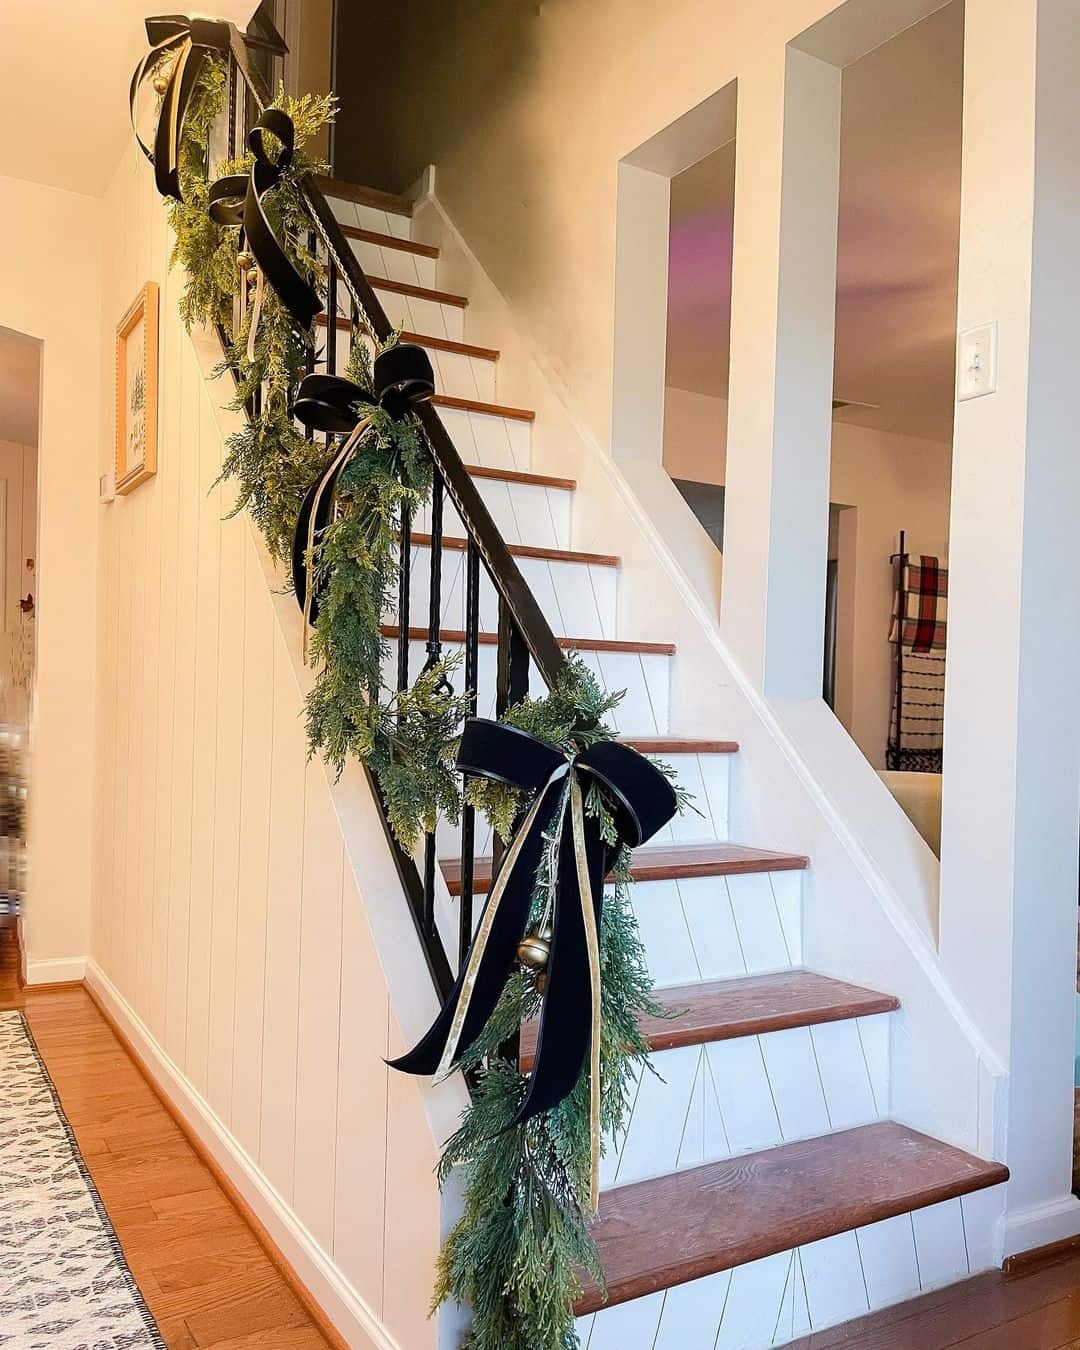 32 Stair Trim Ideas to Elevate Your Home